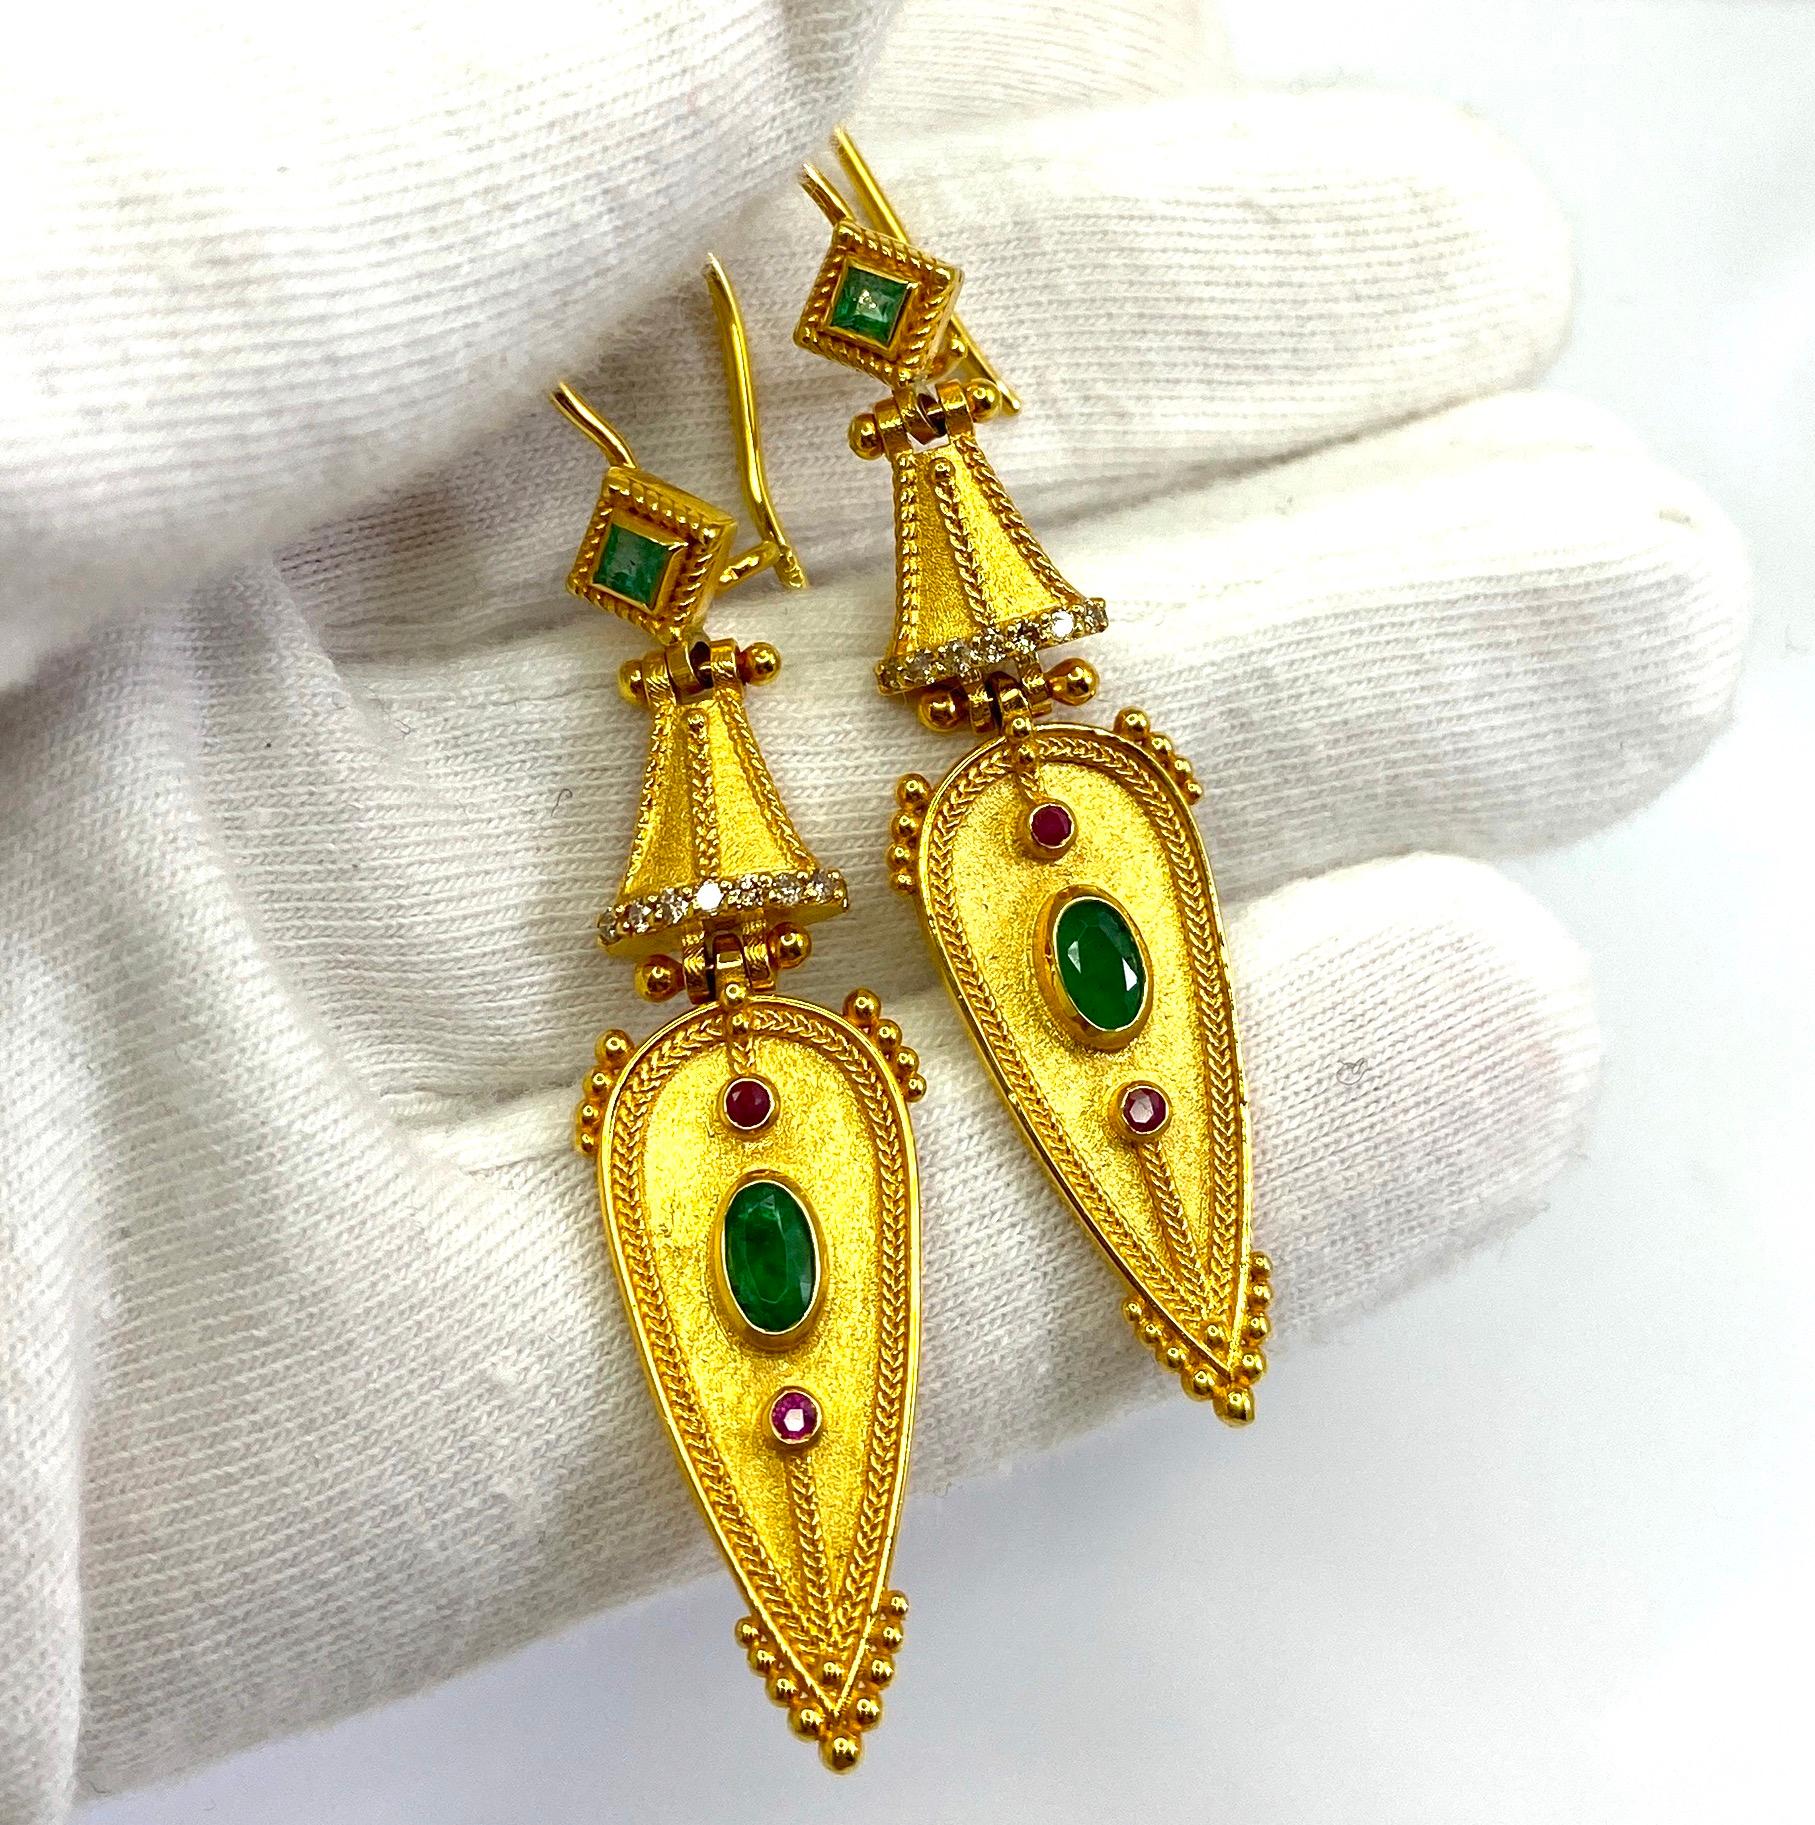 These S.Georgios designers Byzantine-era style 18 Karat Yellow Gold earrings are hand-made with granulation workmanship done microscopically and are finished with a unique velvet background. 
This gorgeous pair of earrings features 2 oval cut and 2